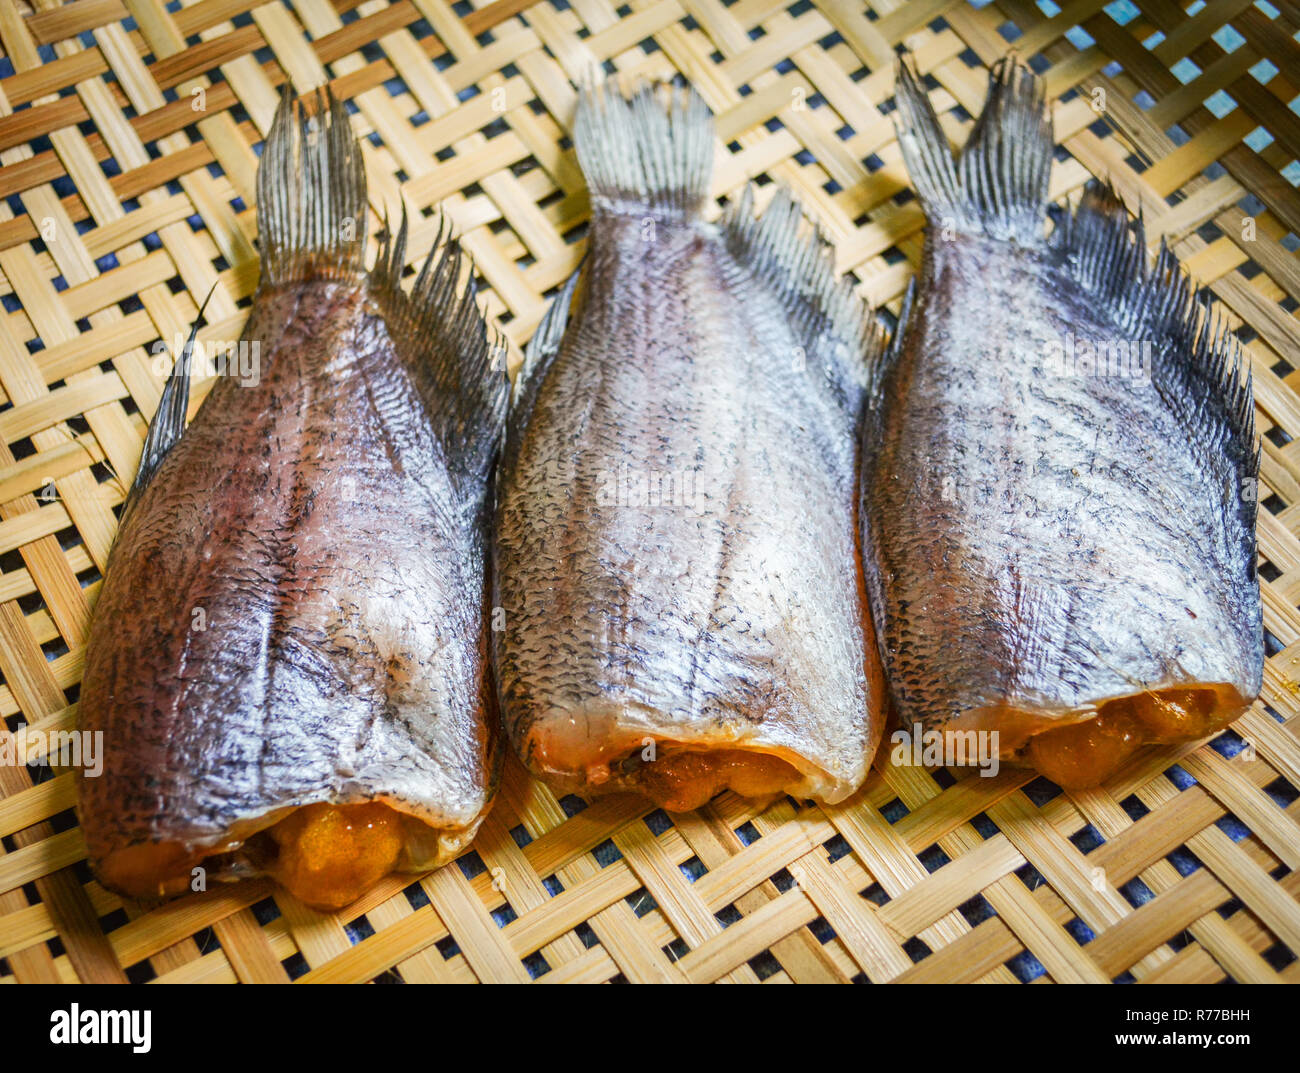 sun dried fish / trichogaster pectoralis fish dried with spawn on bamboo basket Stock Photo